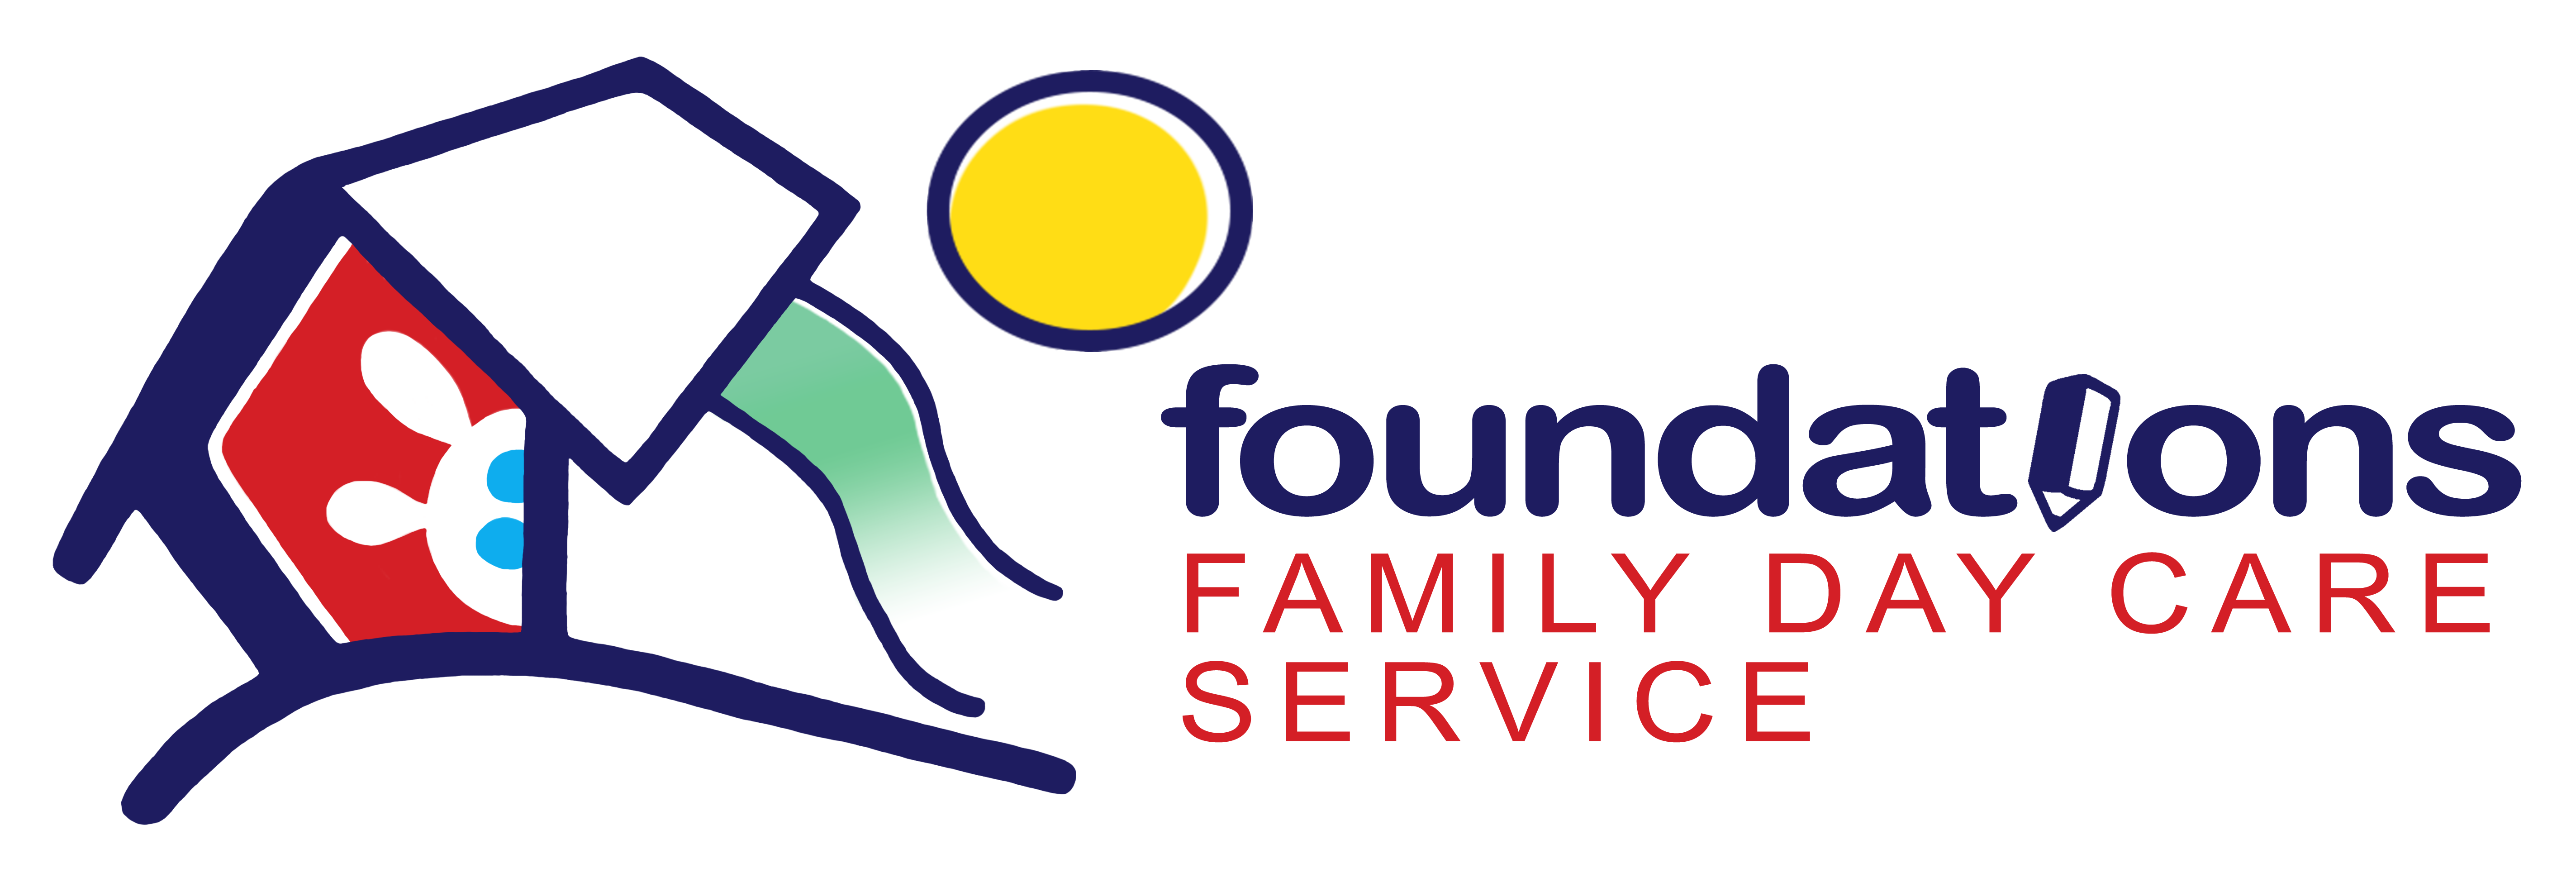 Foundations Family Day Care Service